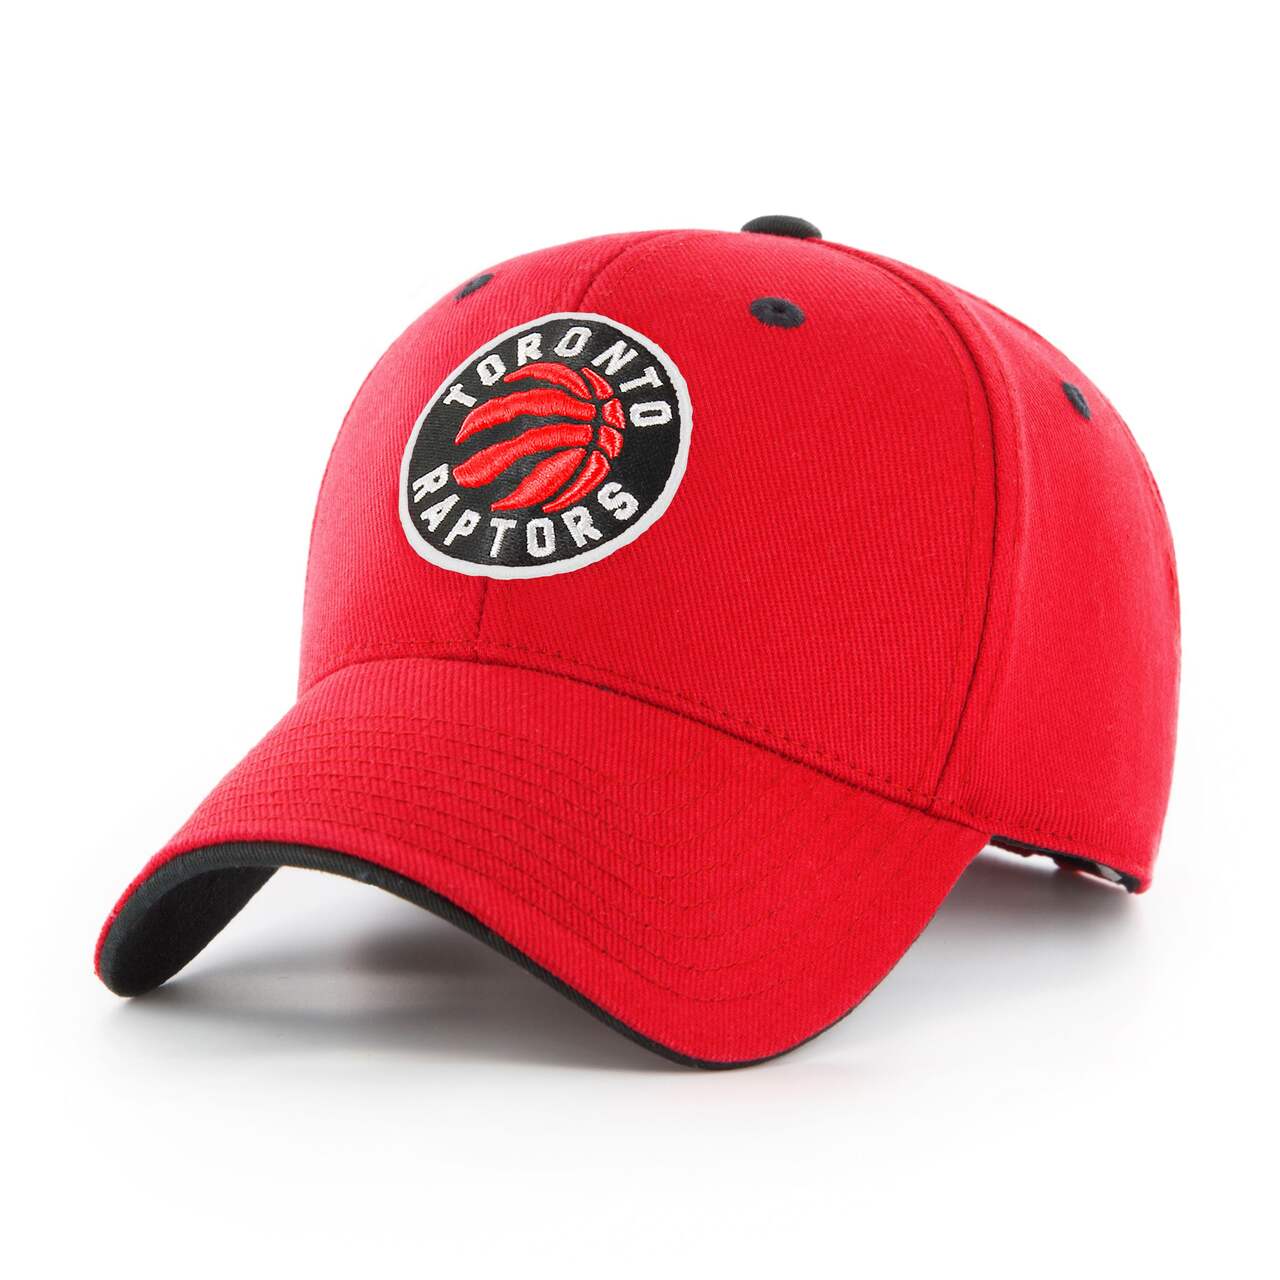 https://media-www.canadiantire.ca/product/playing/team-sports-and-golf/sports-equipment-accessories/0845898/toronto-raptors-youth-cap-1ccacecb-3b2e-4bc0-92d7-49a325d338be-jpgrendition.jpg?imdensity=1&imwidth=640&impolicy=mZoom